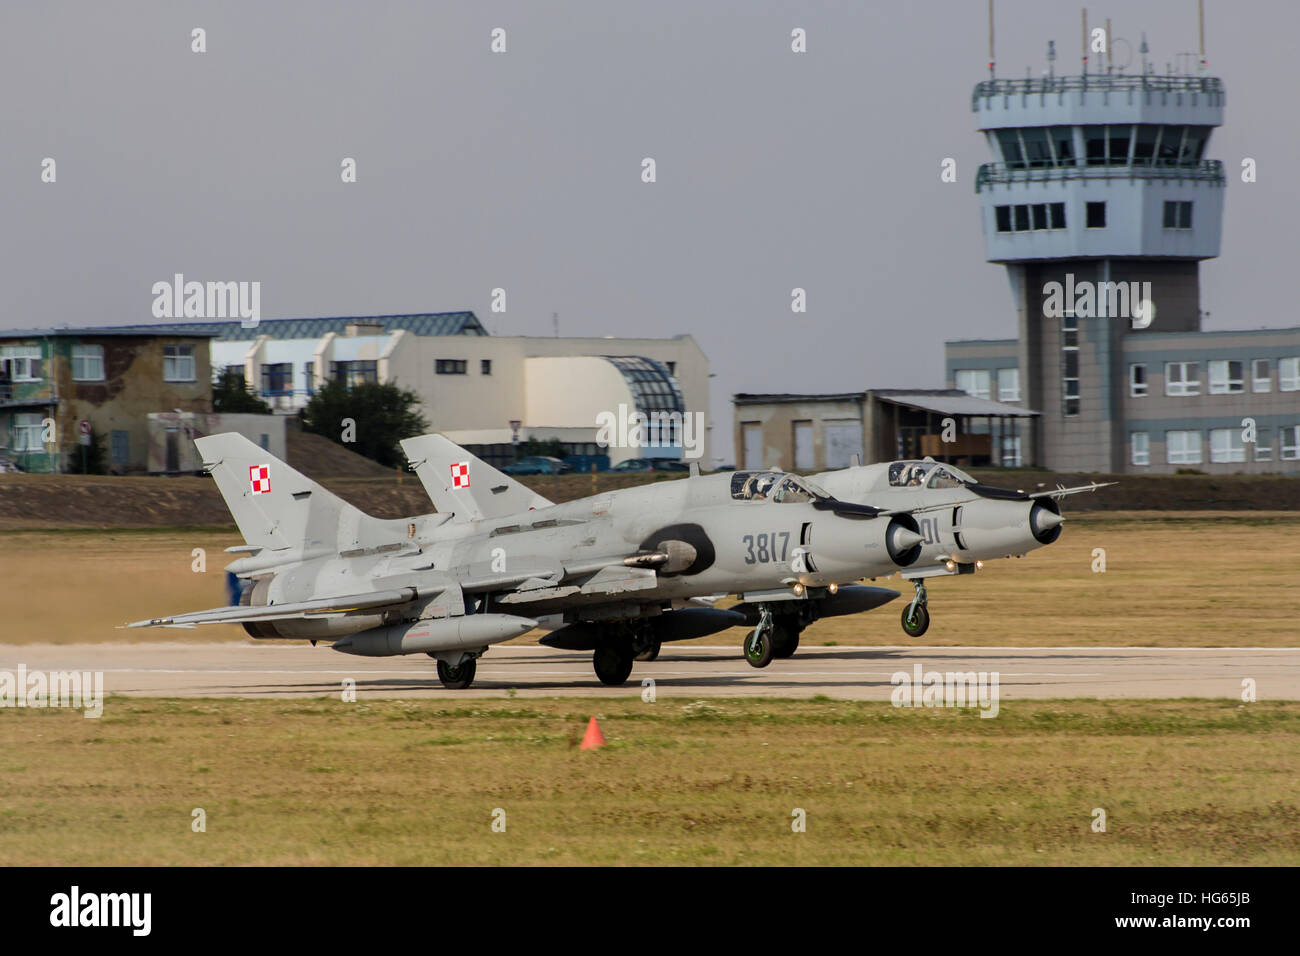 Two Polish Air Force Su-22 fighter-bombers at a NATO exercise. Stock Photo